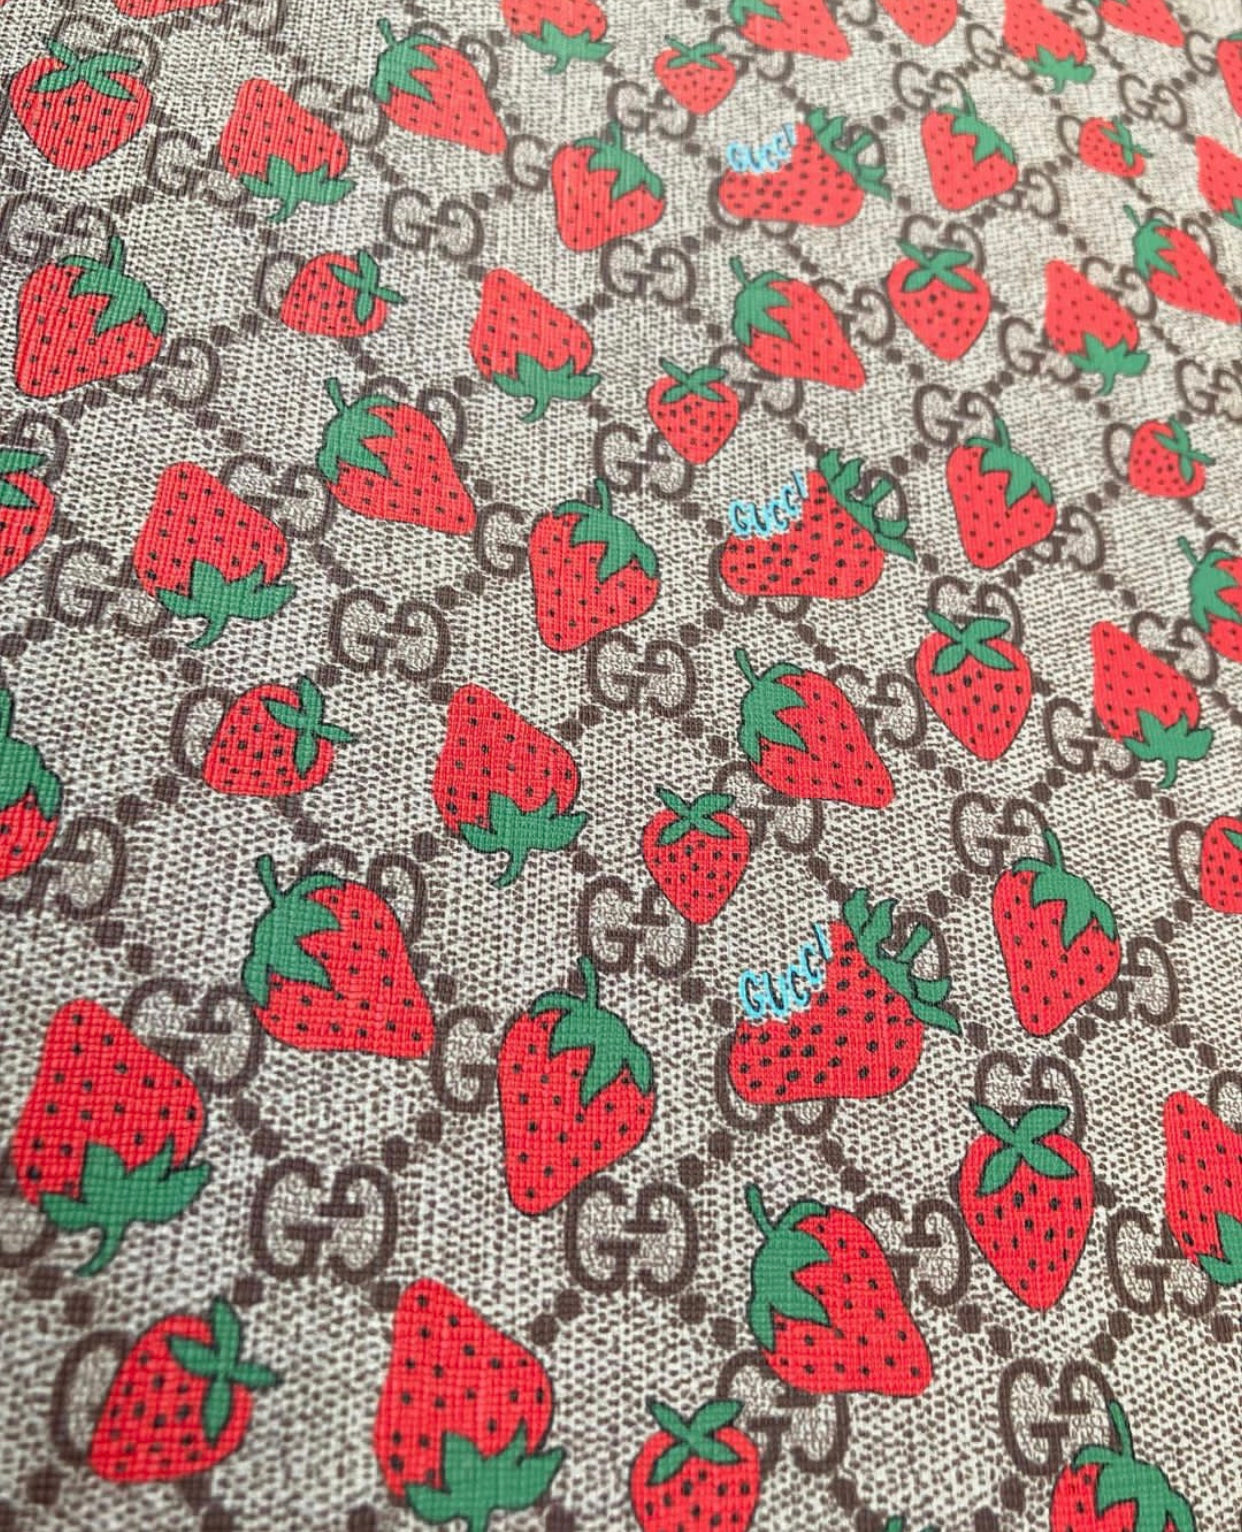 Handmade Strawberry Gucci Vinyl Leather for Custom Crafts Shoes